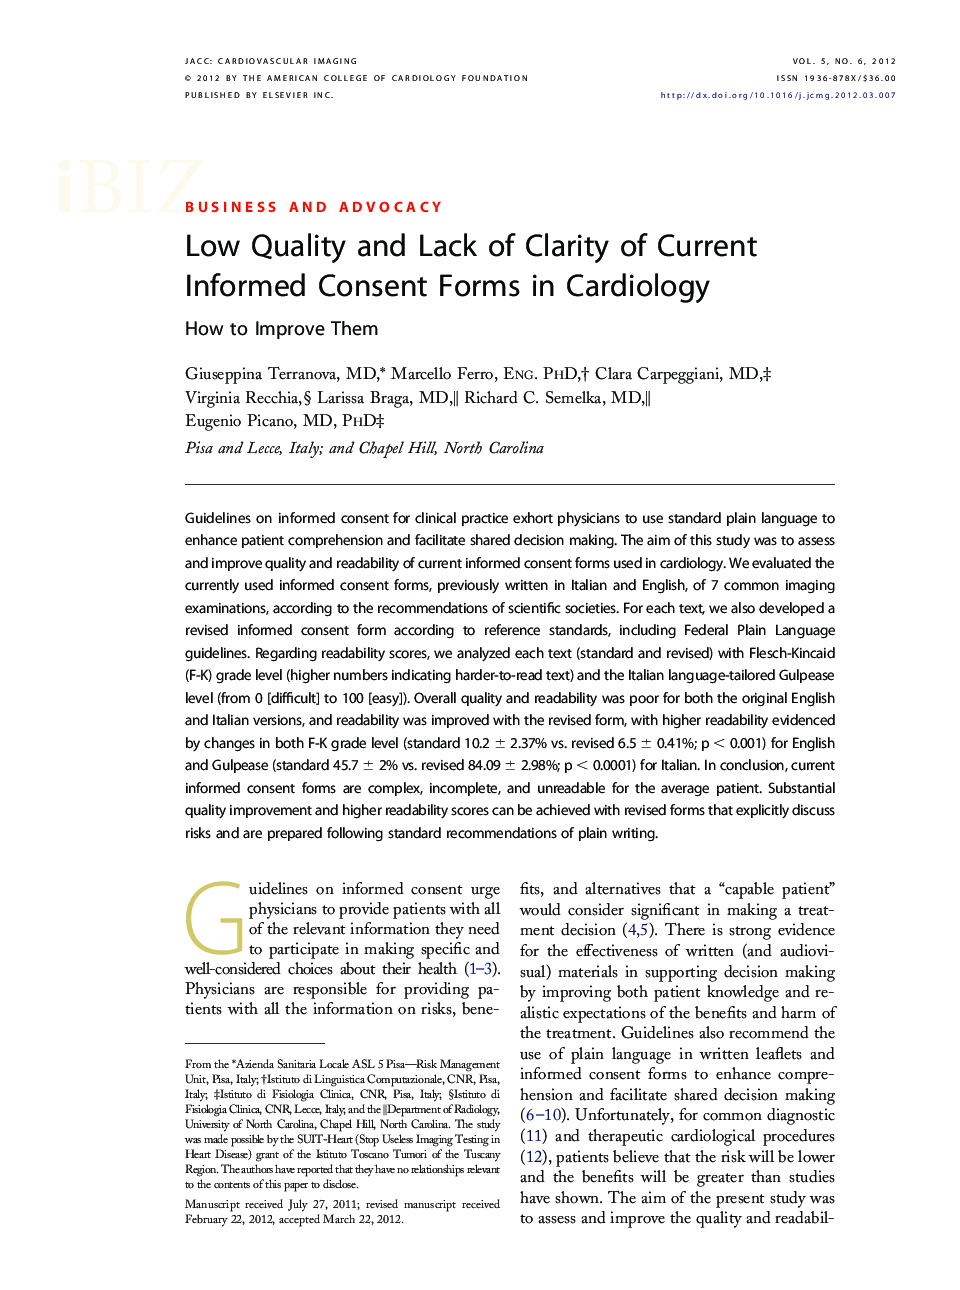 Low Quality and Lack of Clarity of Current Informed Consent Forms in Cardiology : How to Improve Them